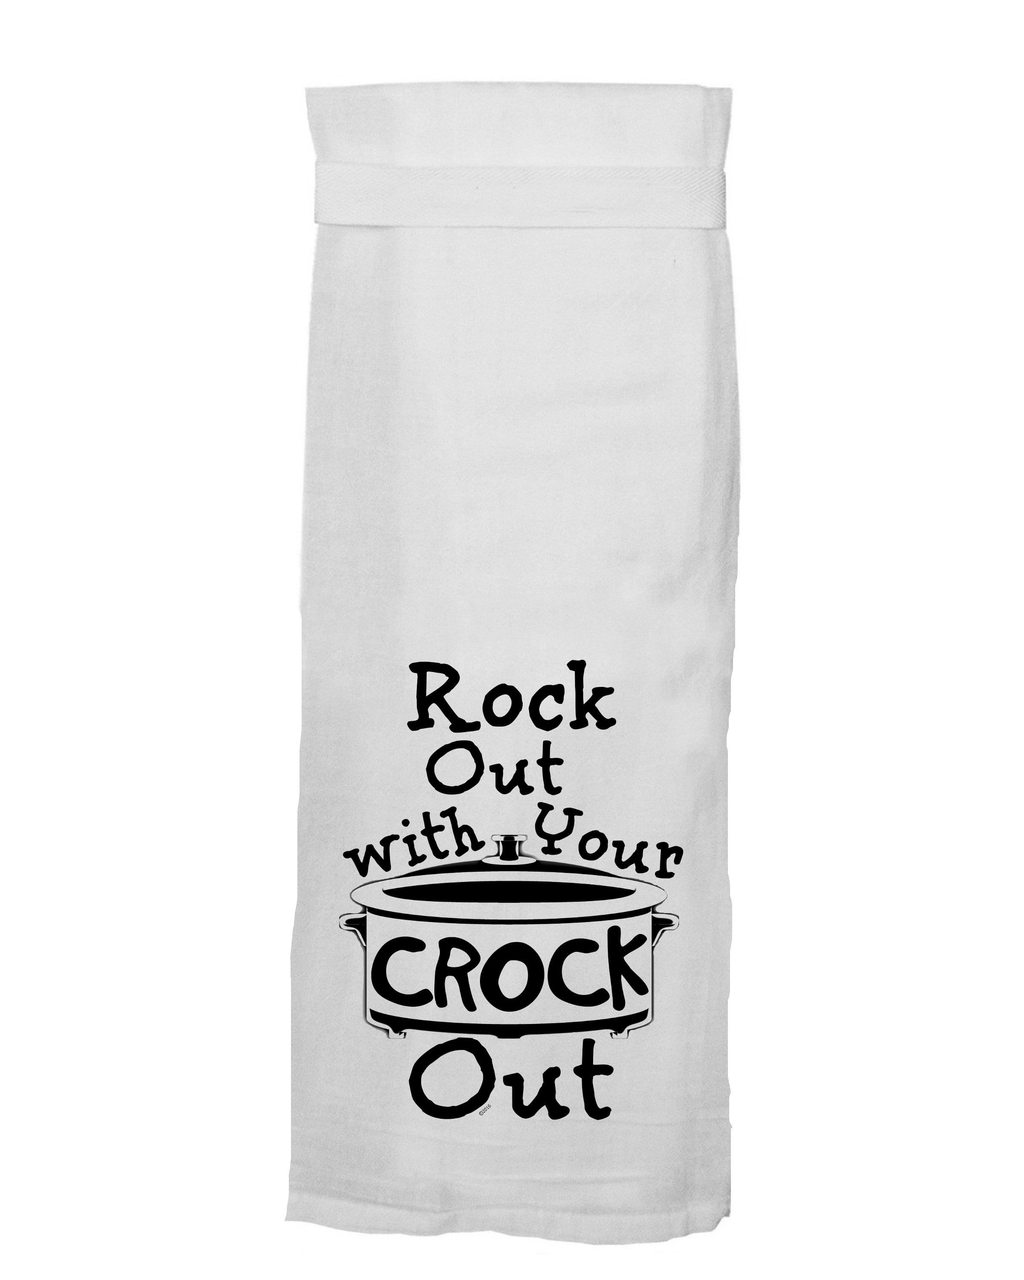 Rock Out With Your Crock Out Tea Towel